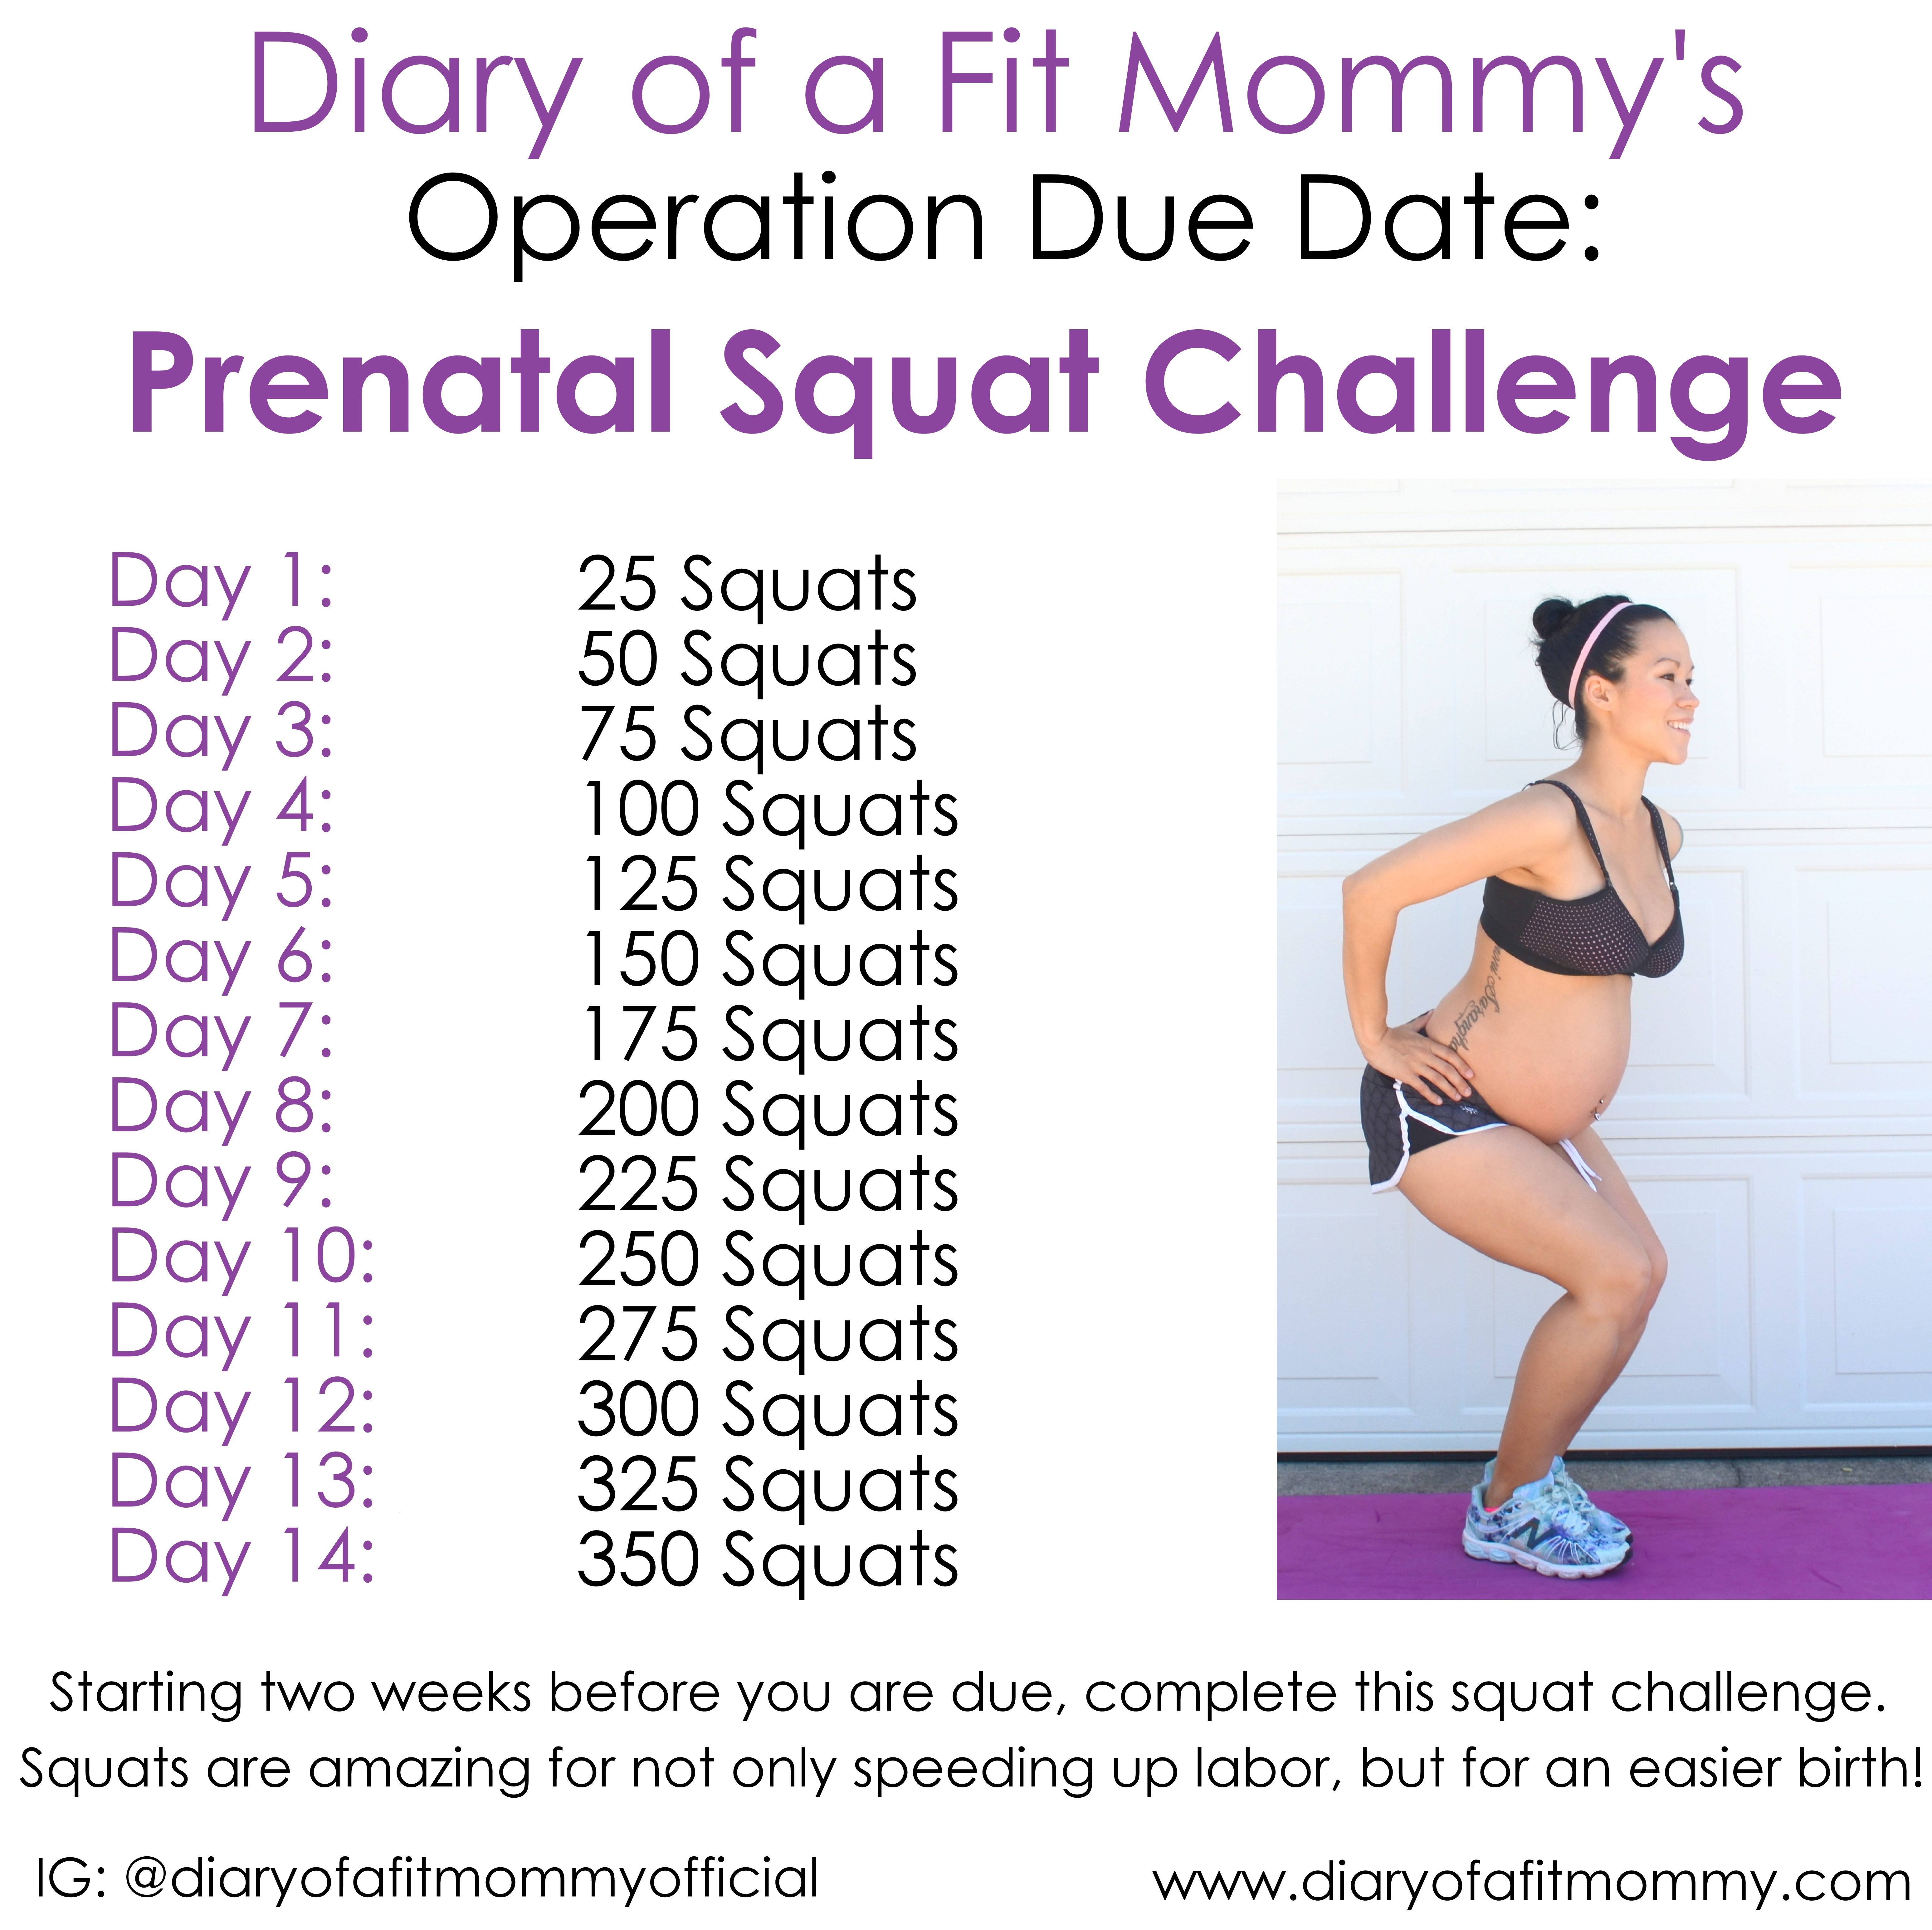 Are Squats Safe To Do During Pregnancy?, Pregnancy Exercise